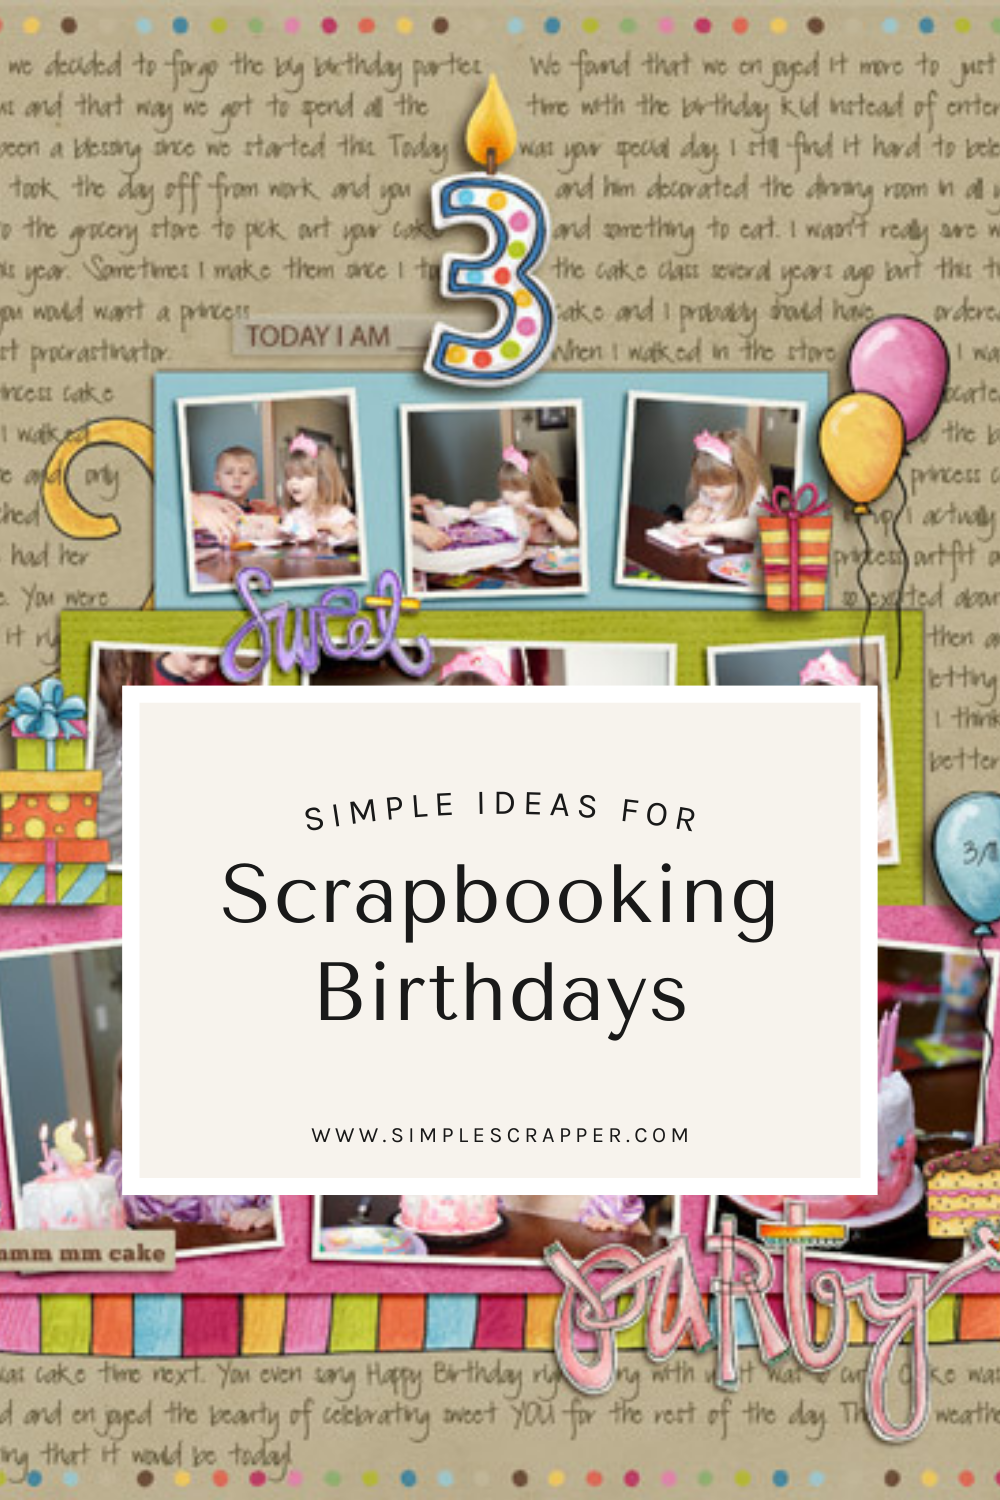 14 Cute Scrapbook Ideas For Every Occasion 